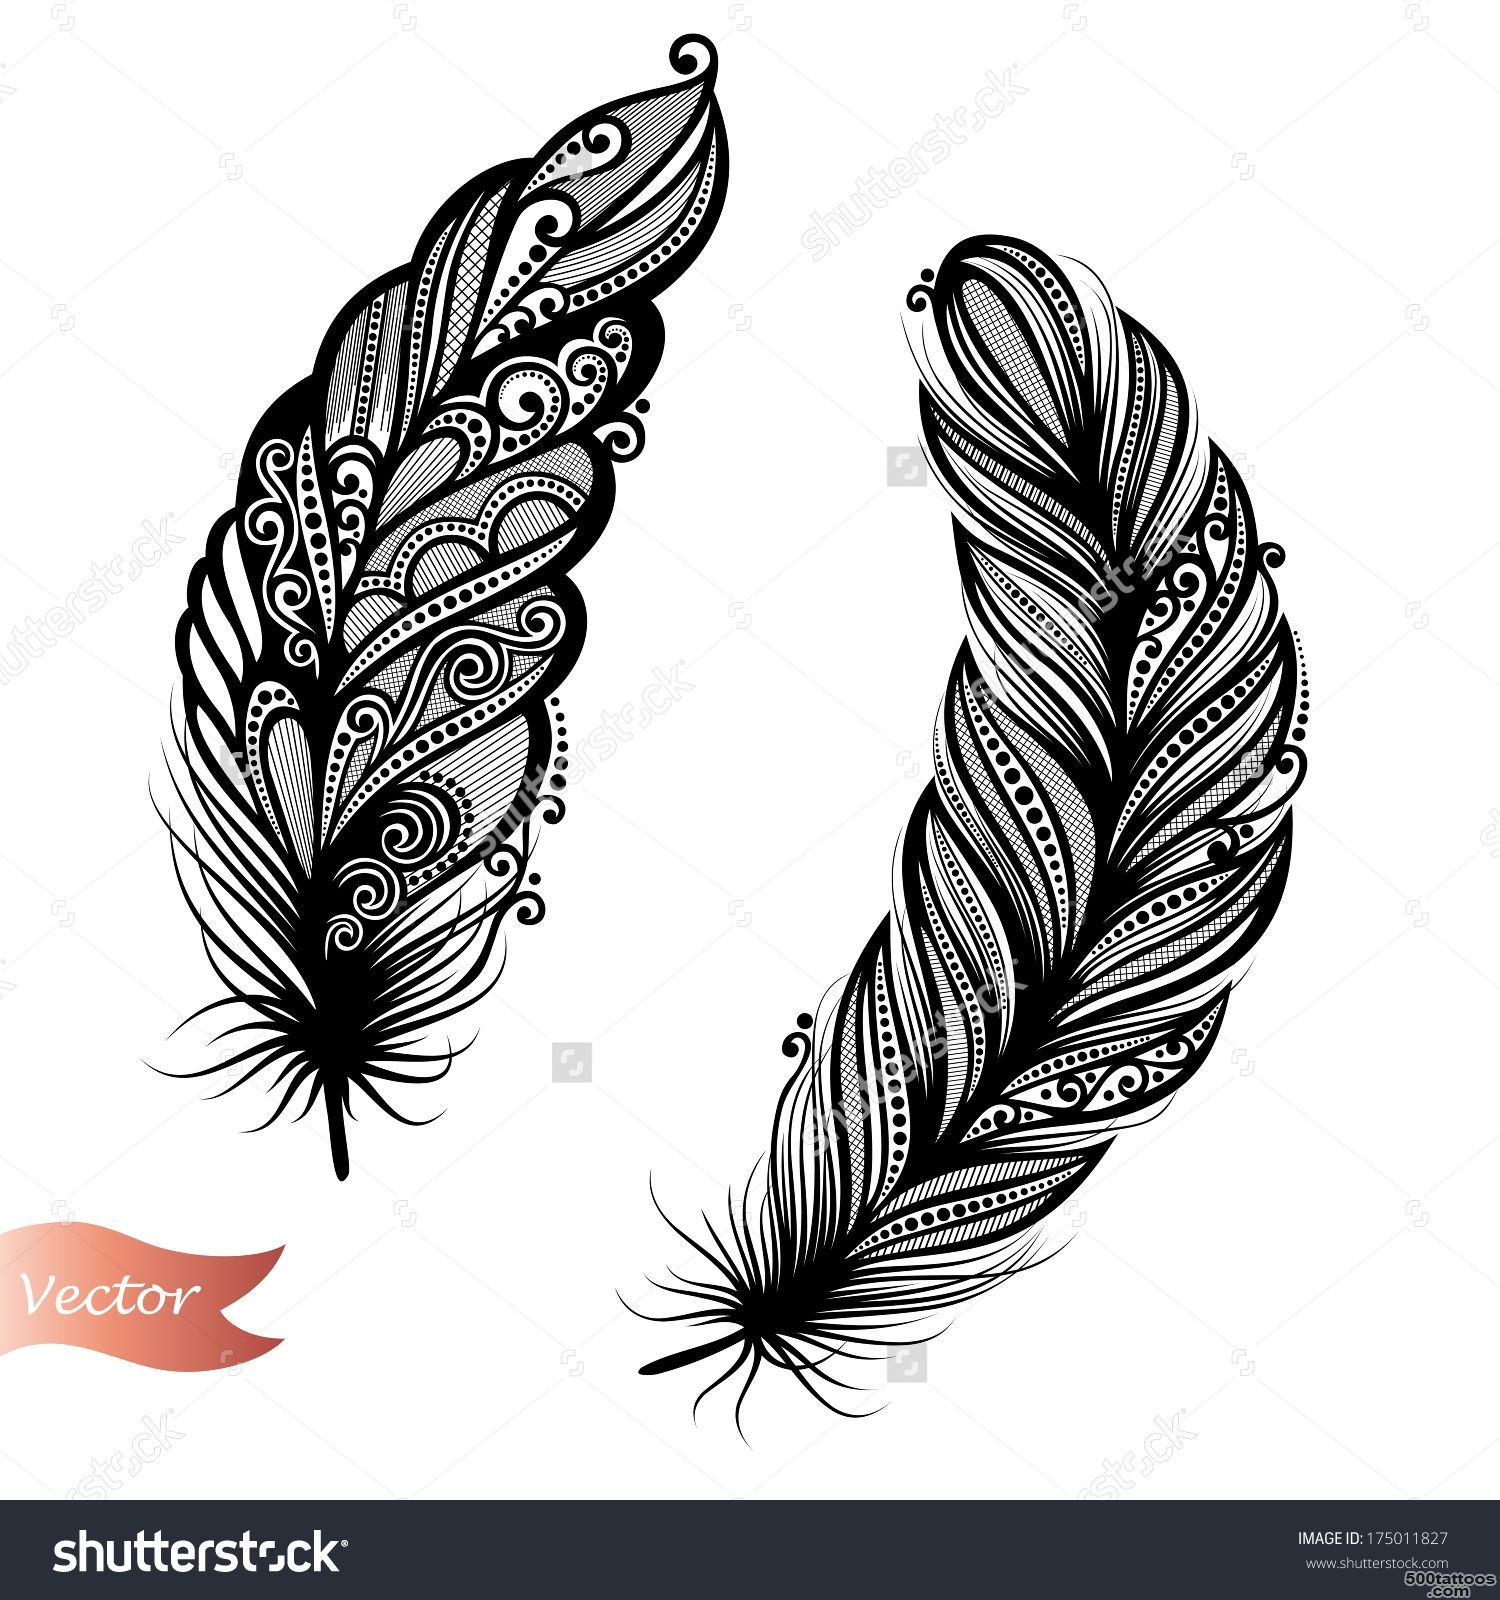 Peerless Decorative Feather (Vector), Patterned Design, Tattoo ..._47